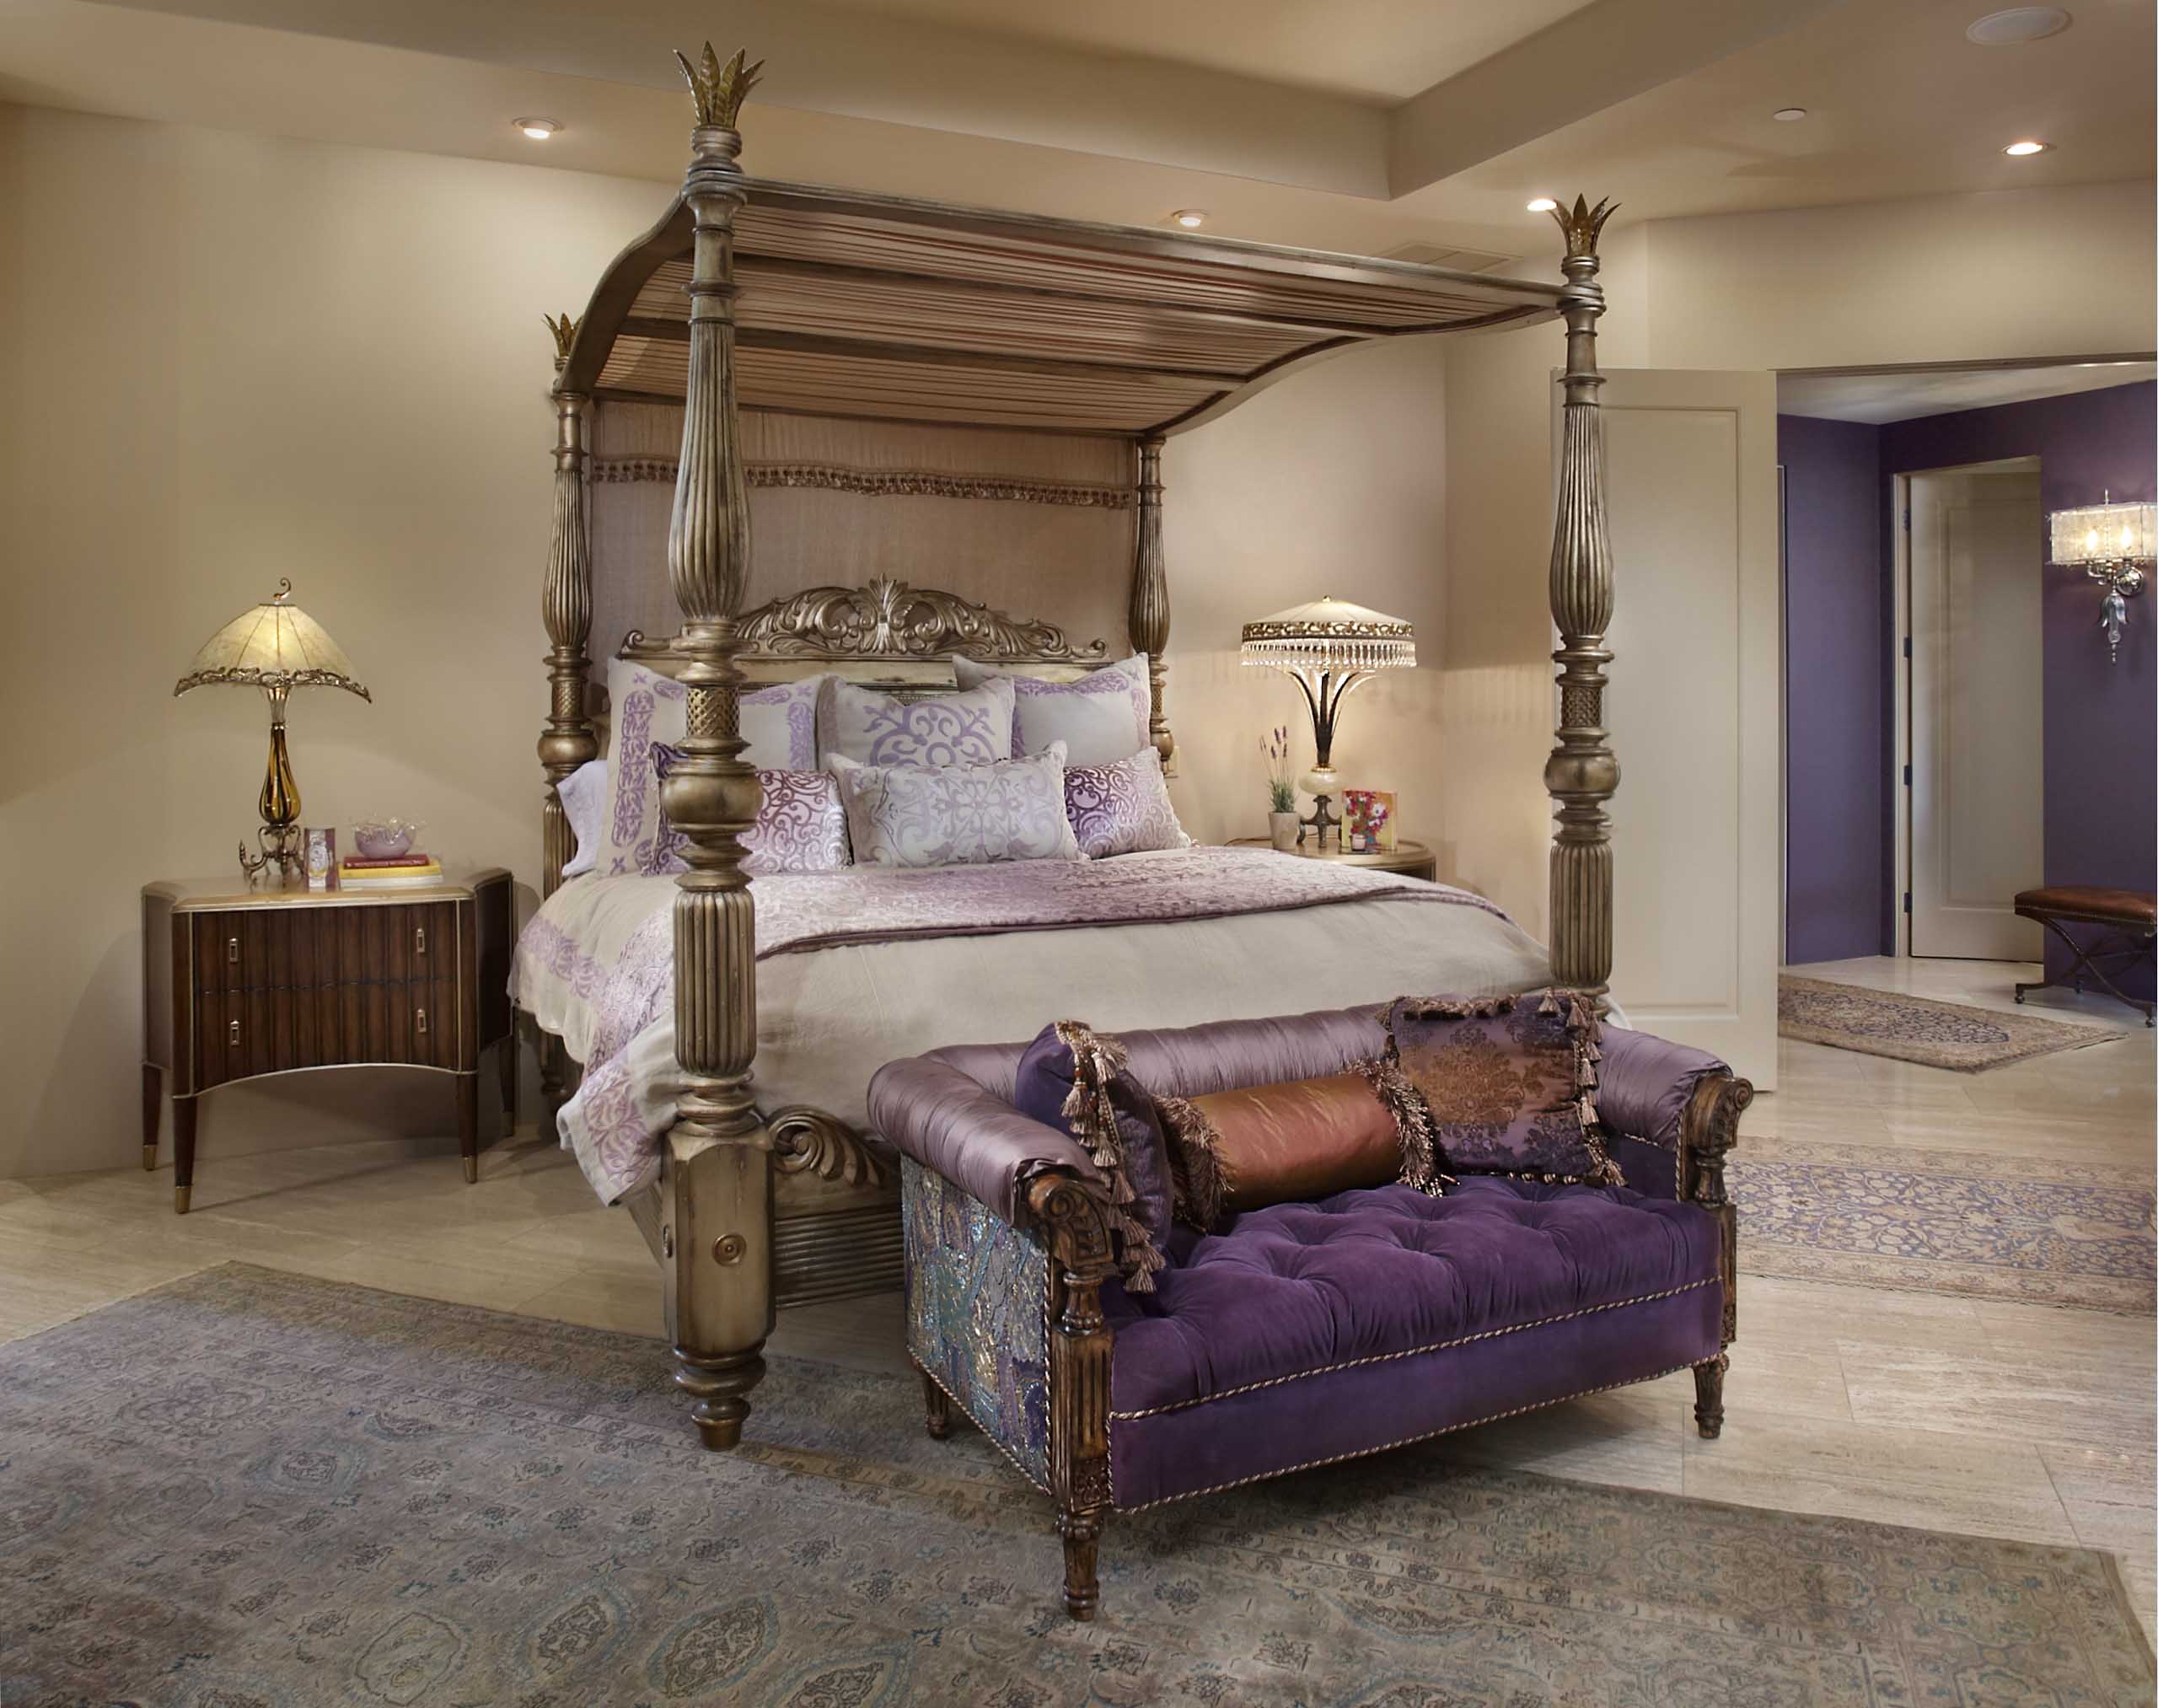 Bedroom with neutral walls, purple accents and a grand four-post bed frame